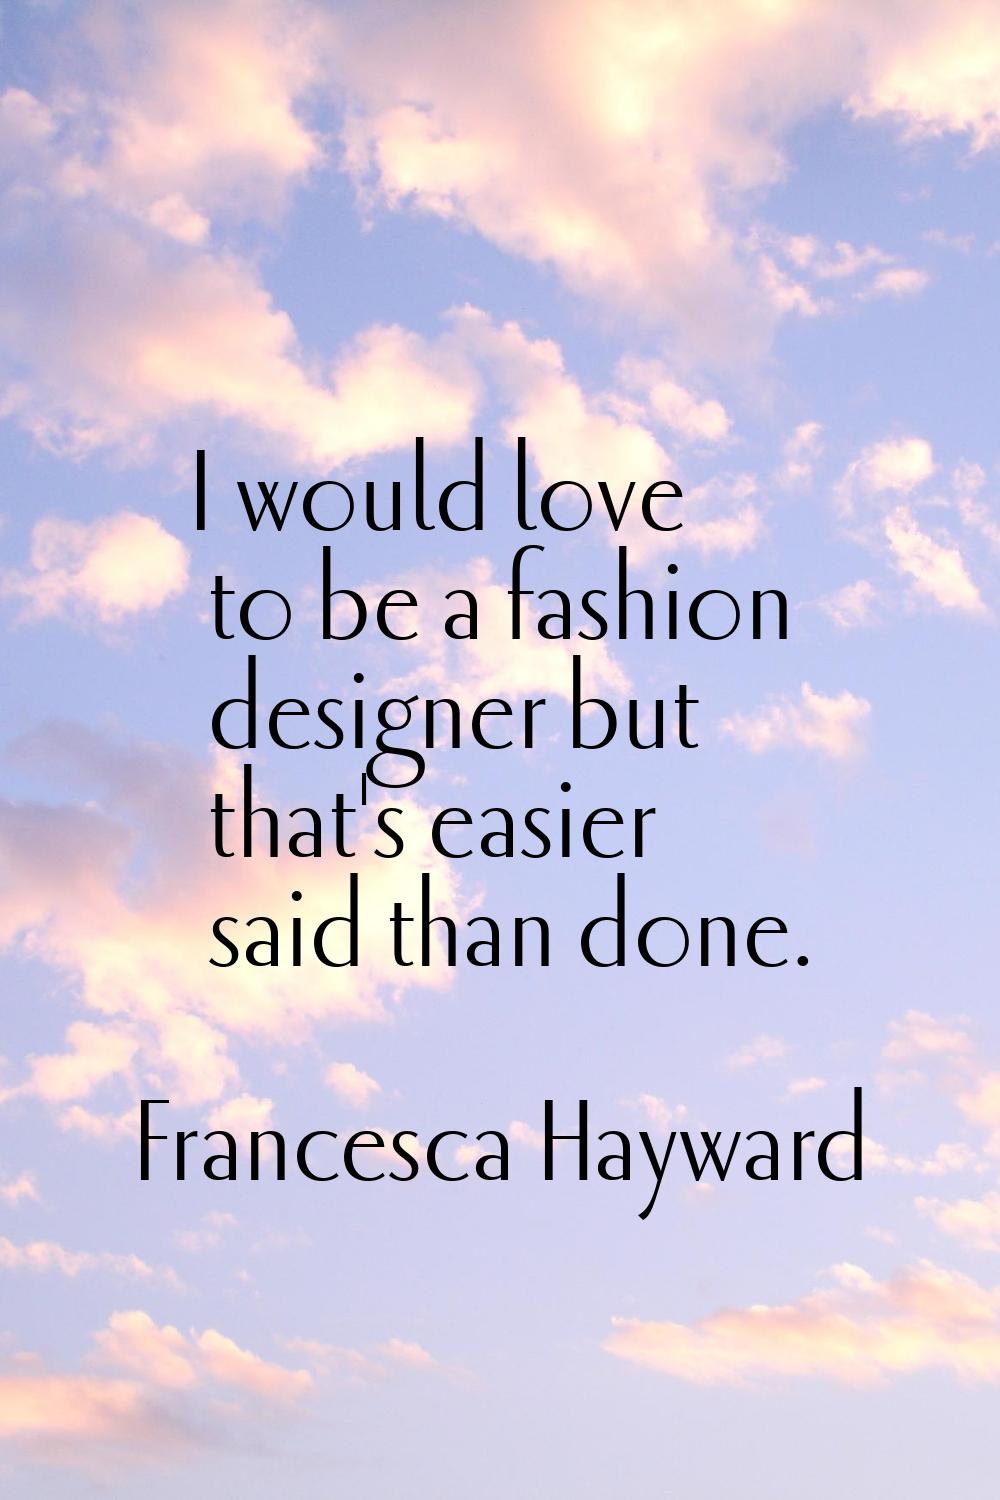 I would love to be a fashion designer but that's easier said than done.